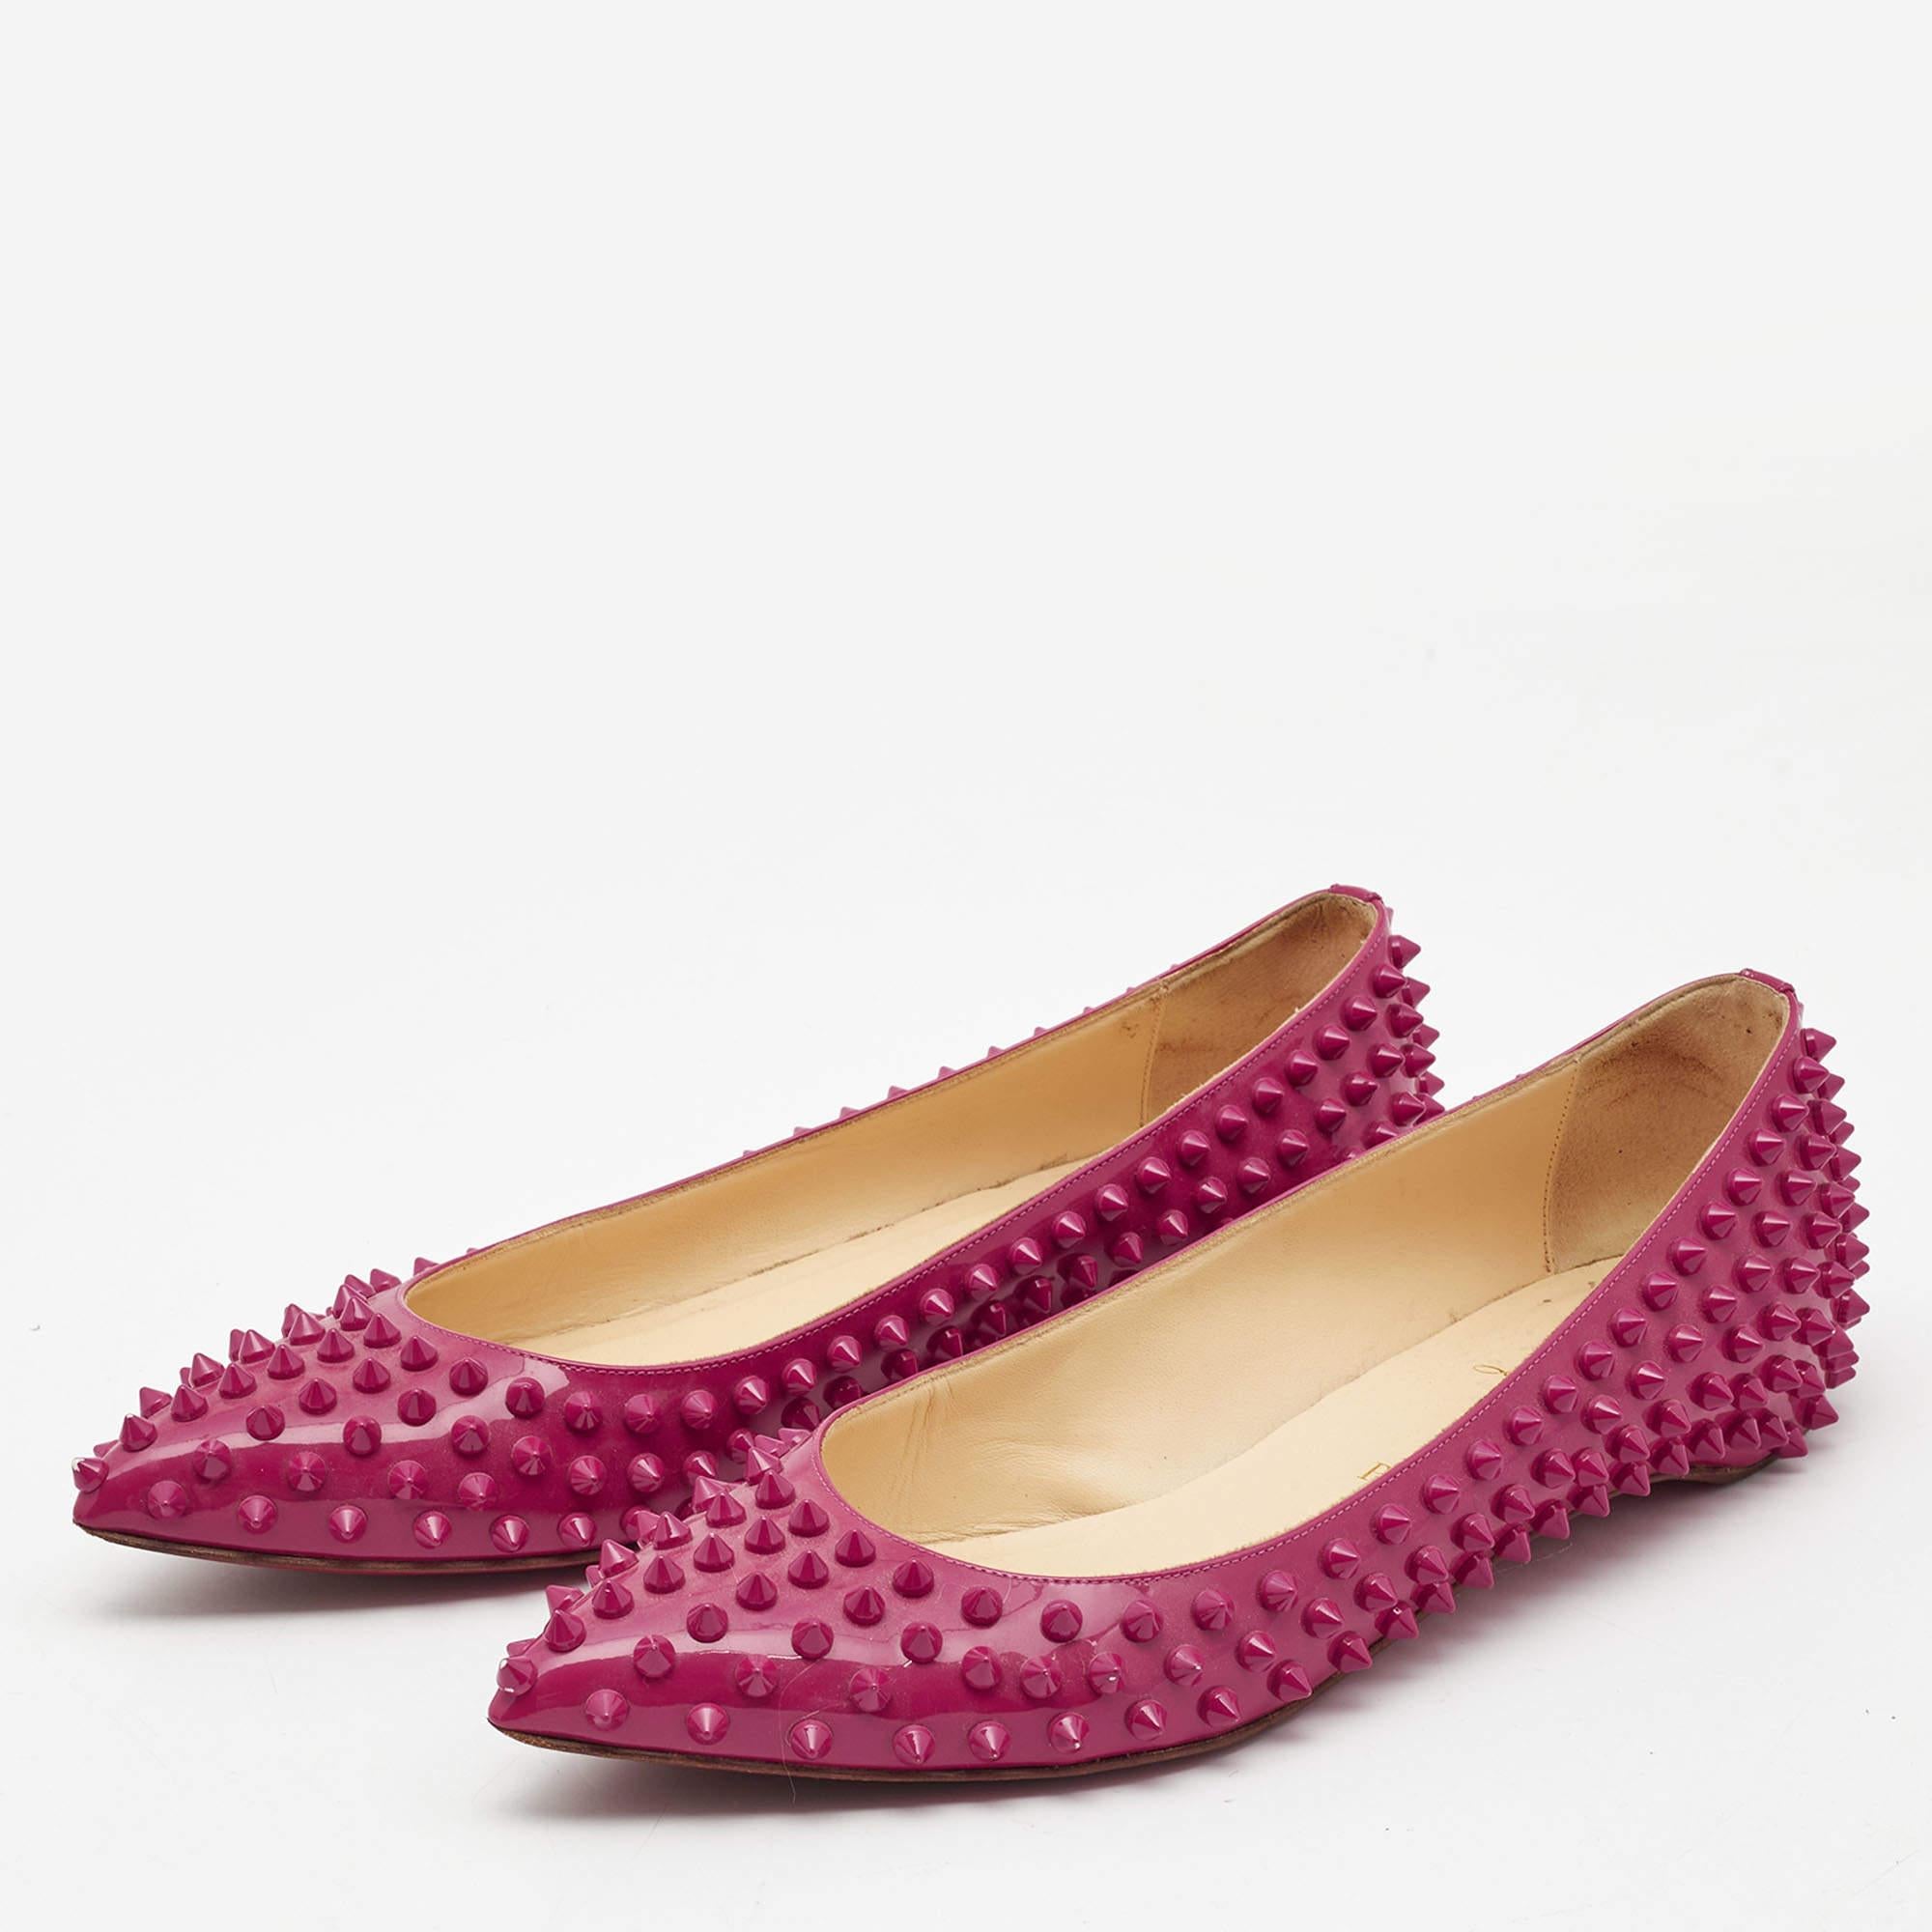 Women's Christian Louboutin Pink Patent Leather Pigalle Spikes Ballet Flats Size 39